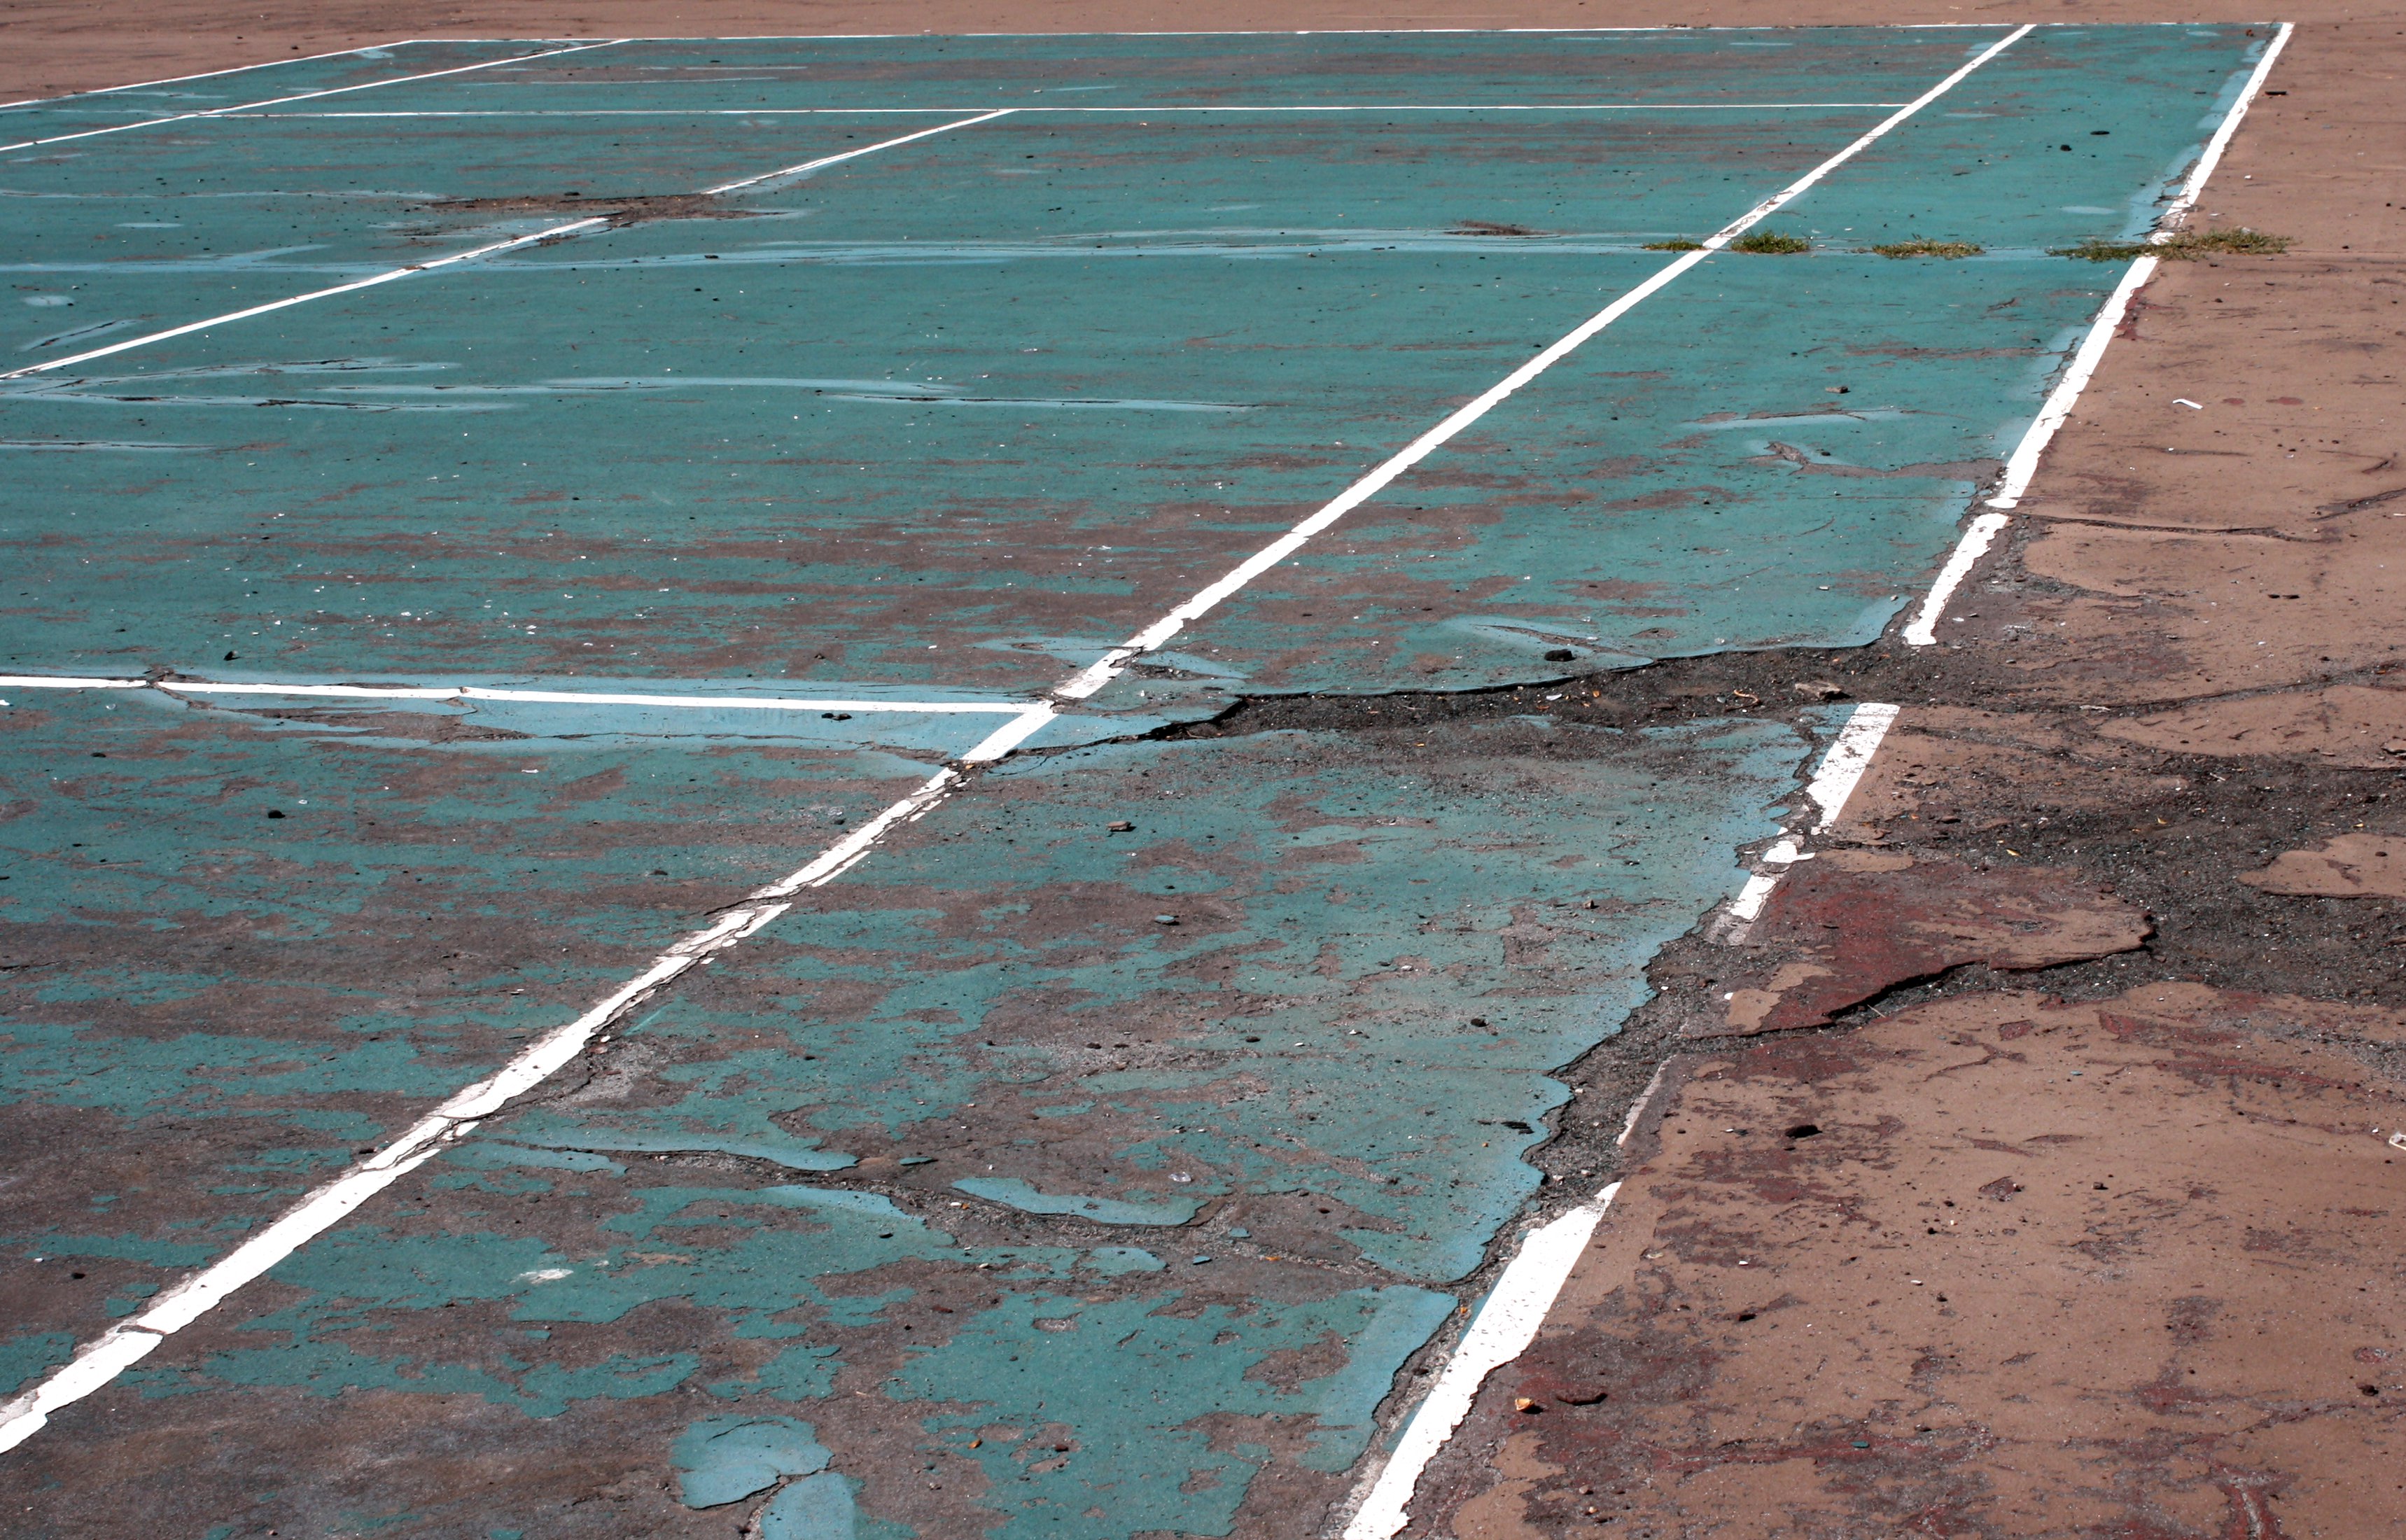 Tennis Court in Disrepair (cracked and faded paint)